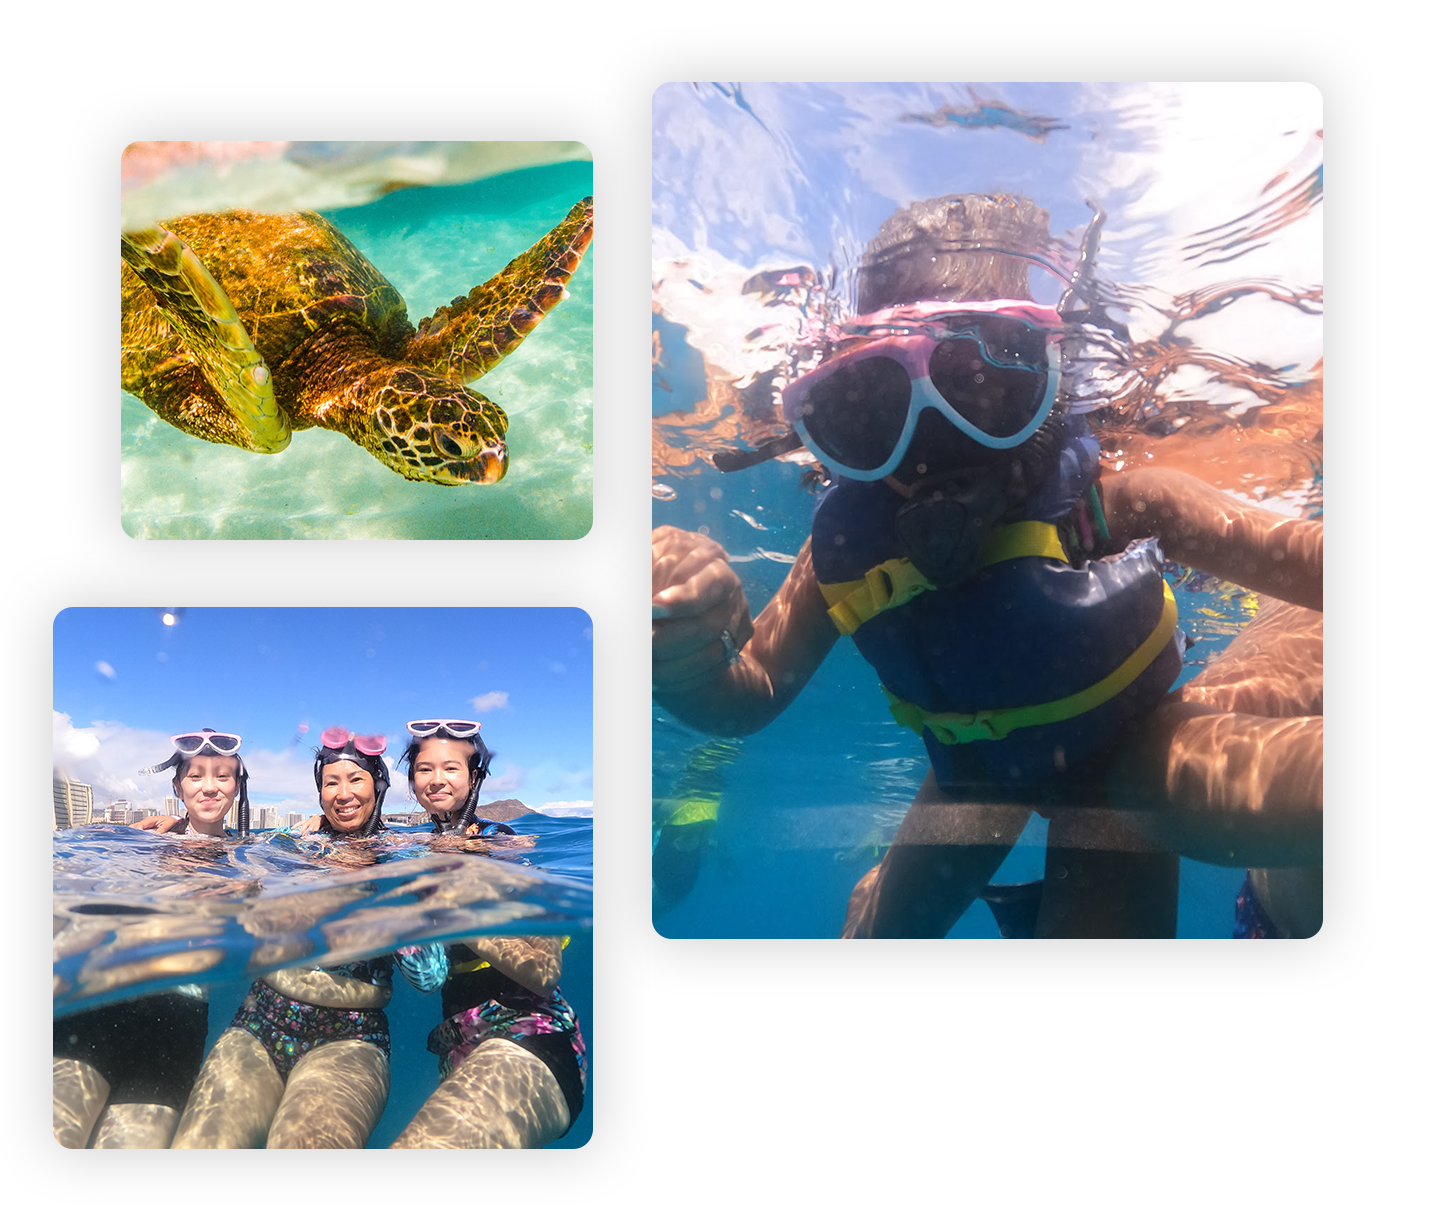 Photo collage showcasing Waikiki Snorkel Company's diverse activities, including a sunset sail and snorkeling with turtles